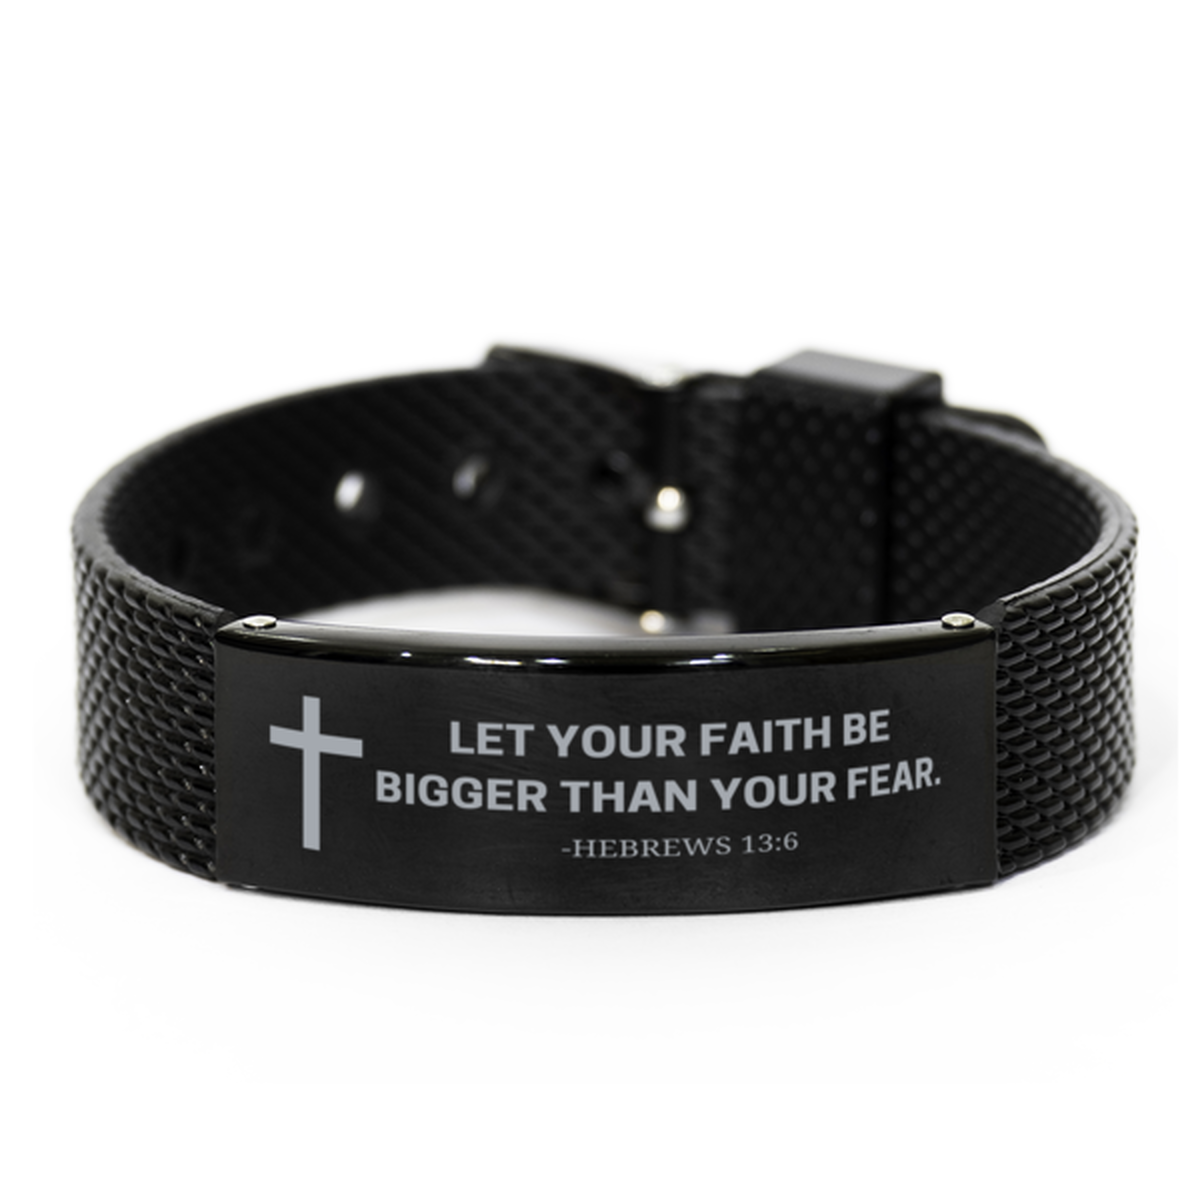 Baptism Gifts For Teenage Boys Girls, Christian Bible Verse Black Shark Mesh Bracelet, Let your faith be bigger than your fear, Catholic Confirmation Gifts for Son, Godson, Grandson, Nephew